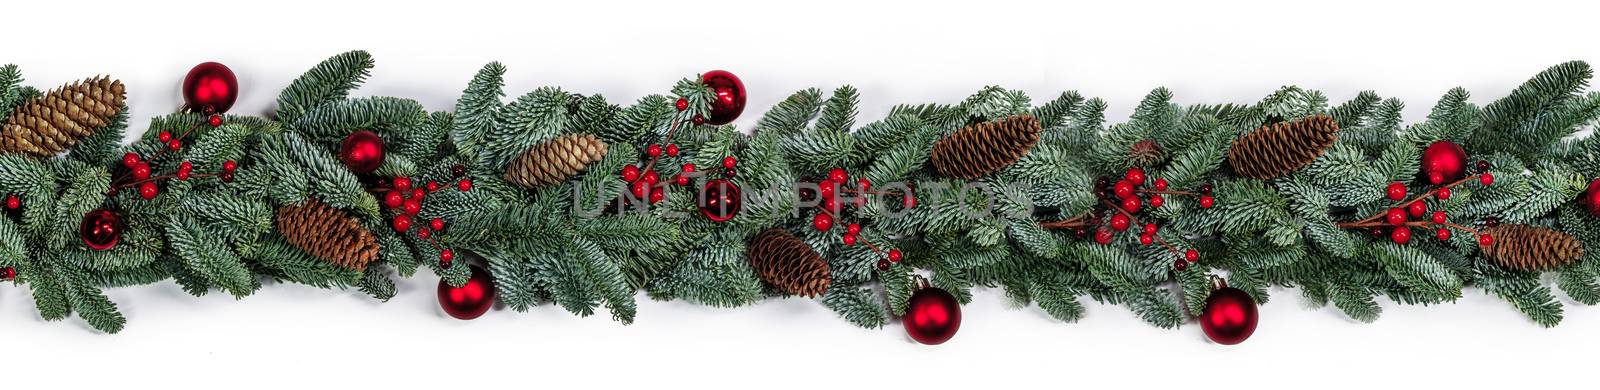 Christmas fir and decorations on white by Yellowj